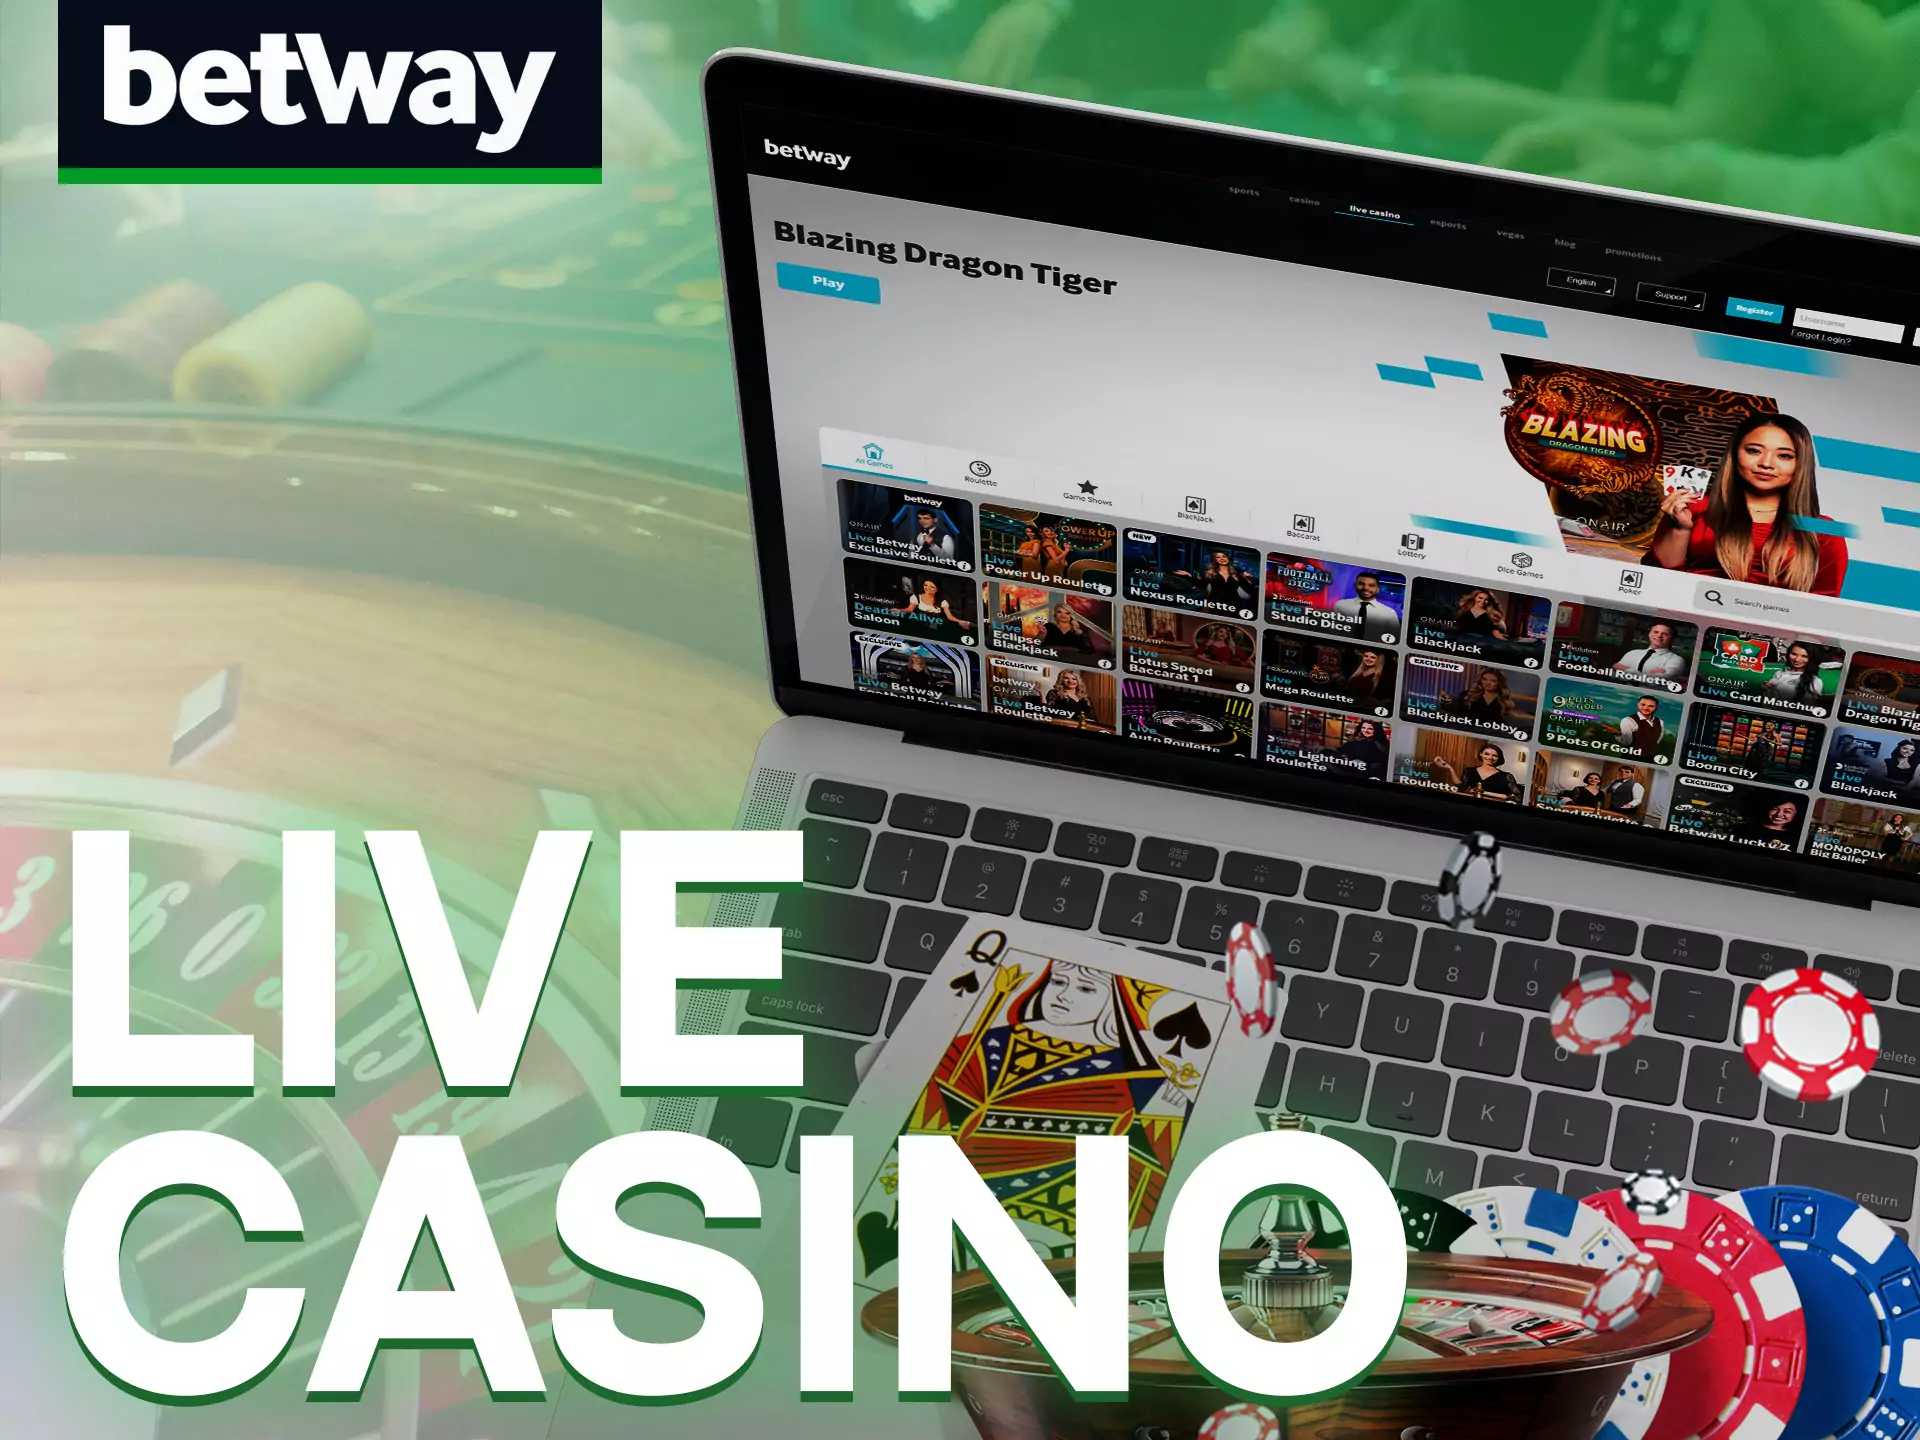 Play Betway casino with real people.